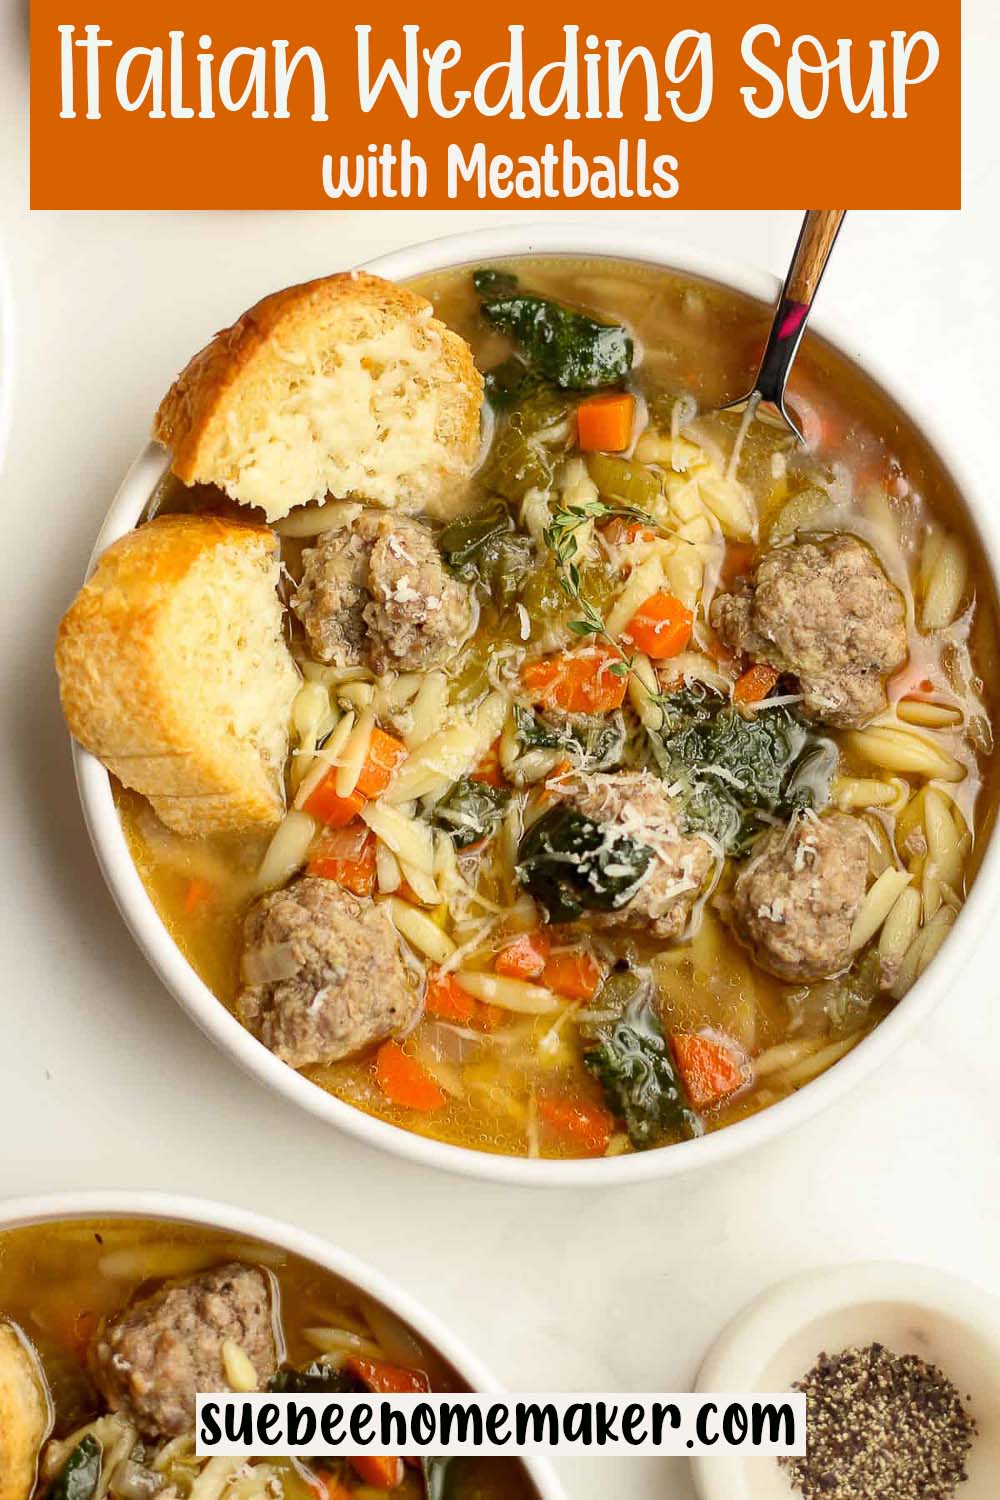 Overhead view of a bowl of Italian Wedding Soup with meatballs.